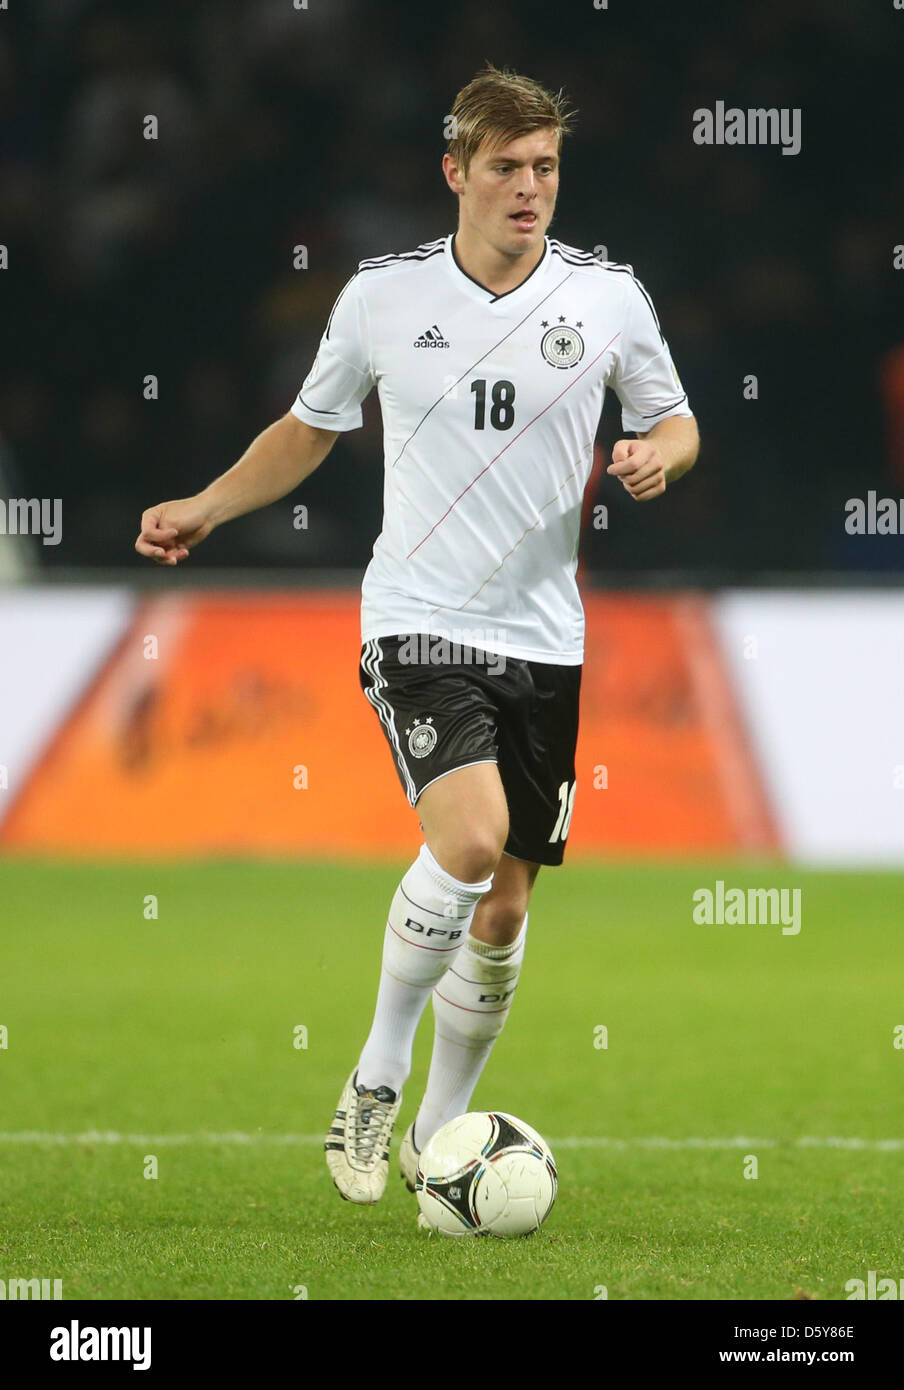 Germany's Toni Kroos in action during the FIFA World Cup 2014 qualifying soccer match between Germany and Sweden at Olympic stadium in Berlin, Germany, 16 October 2012. Photo: Kay Nietfeld/dpa Stock Photo